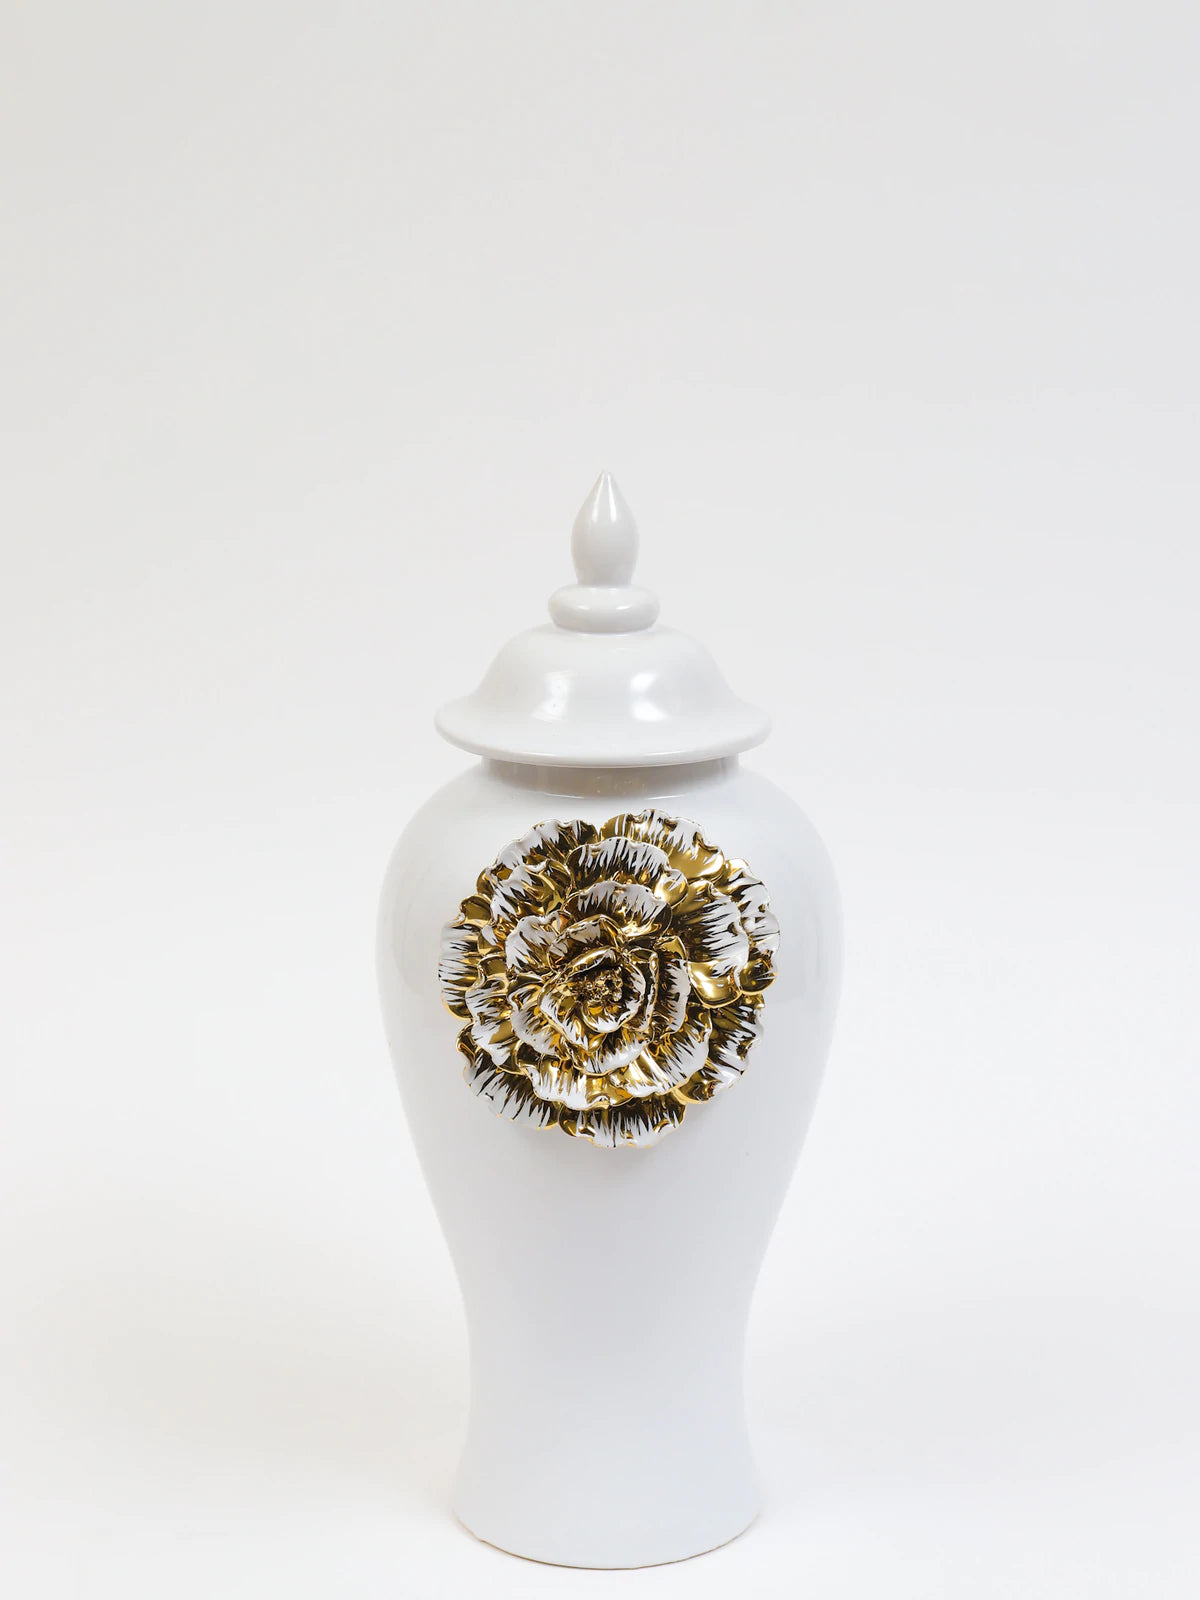 18H White Ginger Jar with Large Gold Flower Detail and Removable Lid. Sold by KYA Home Decor.